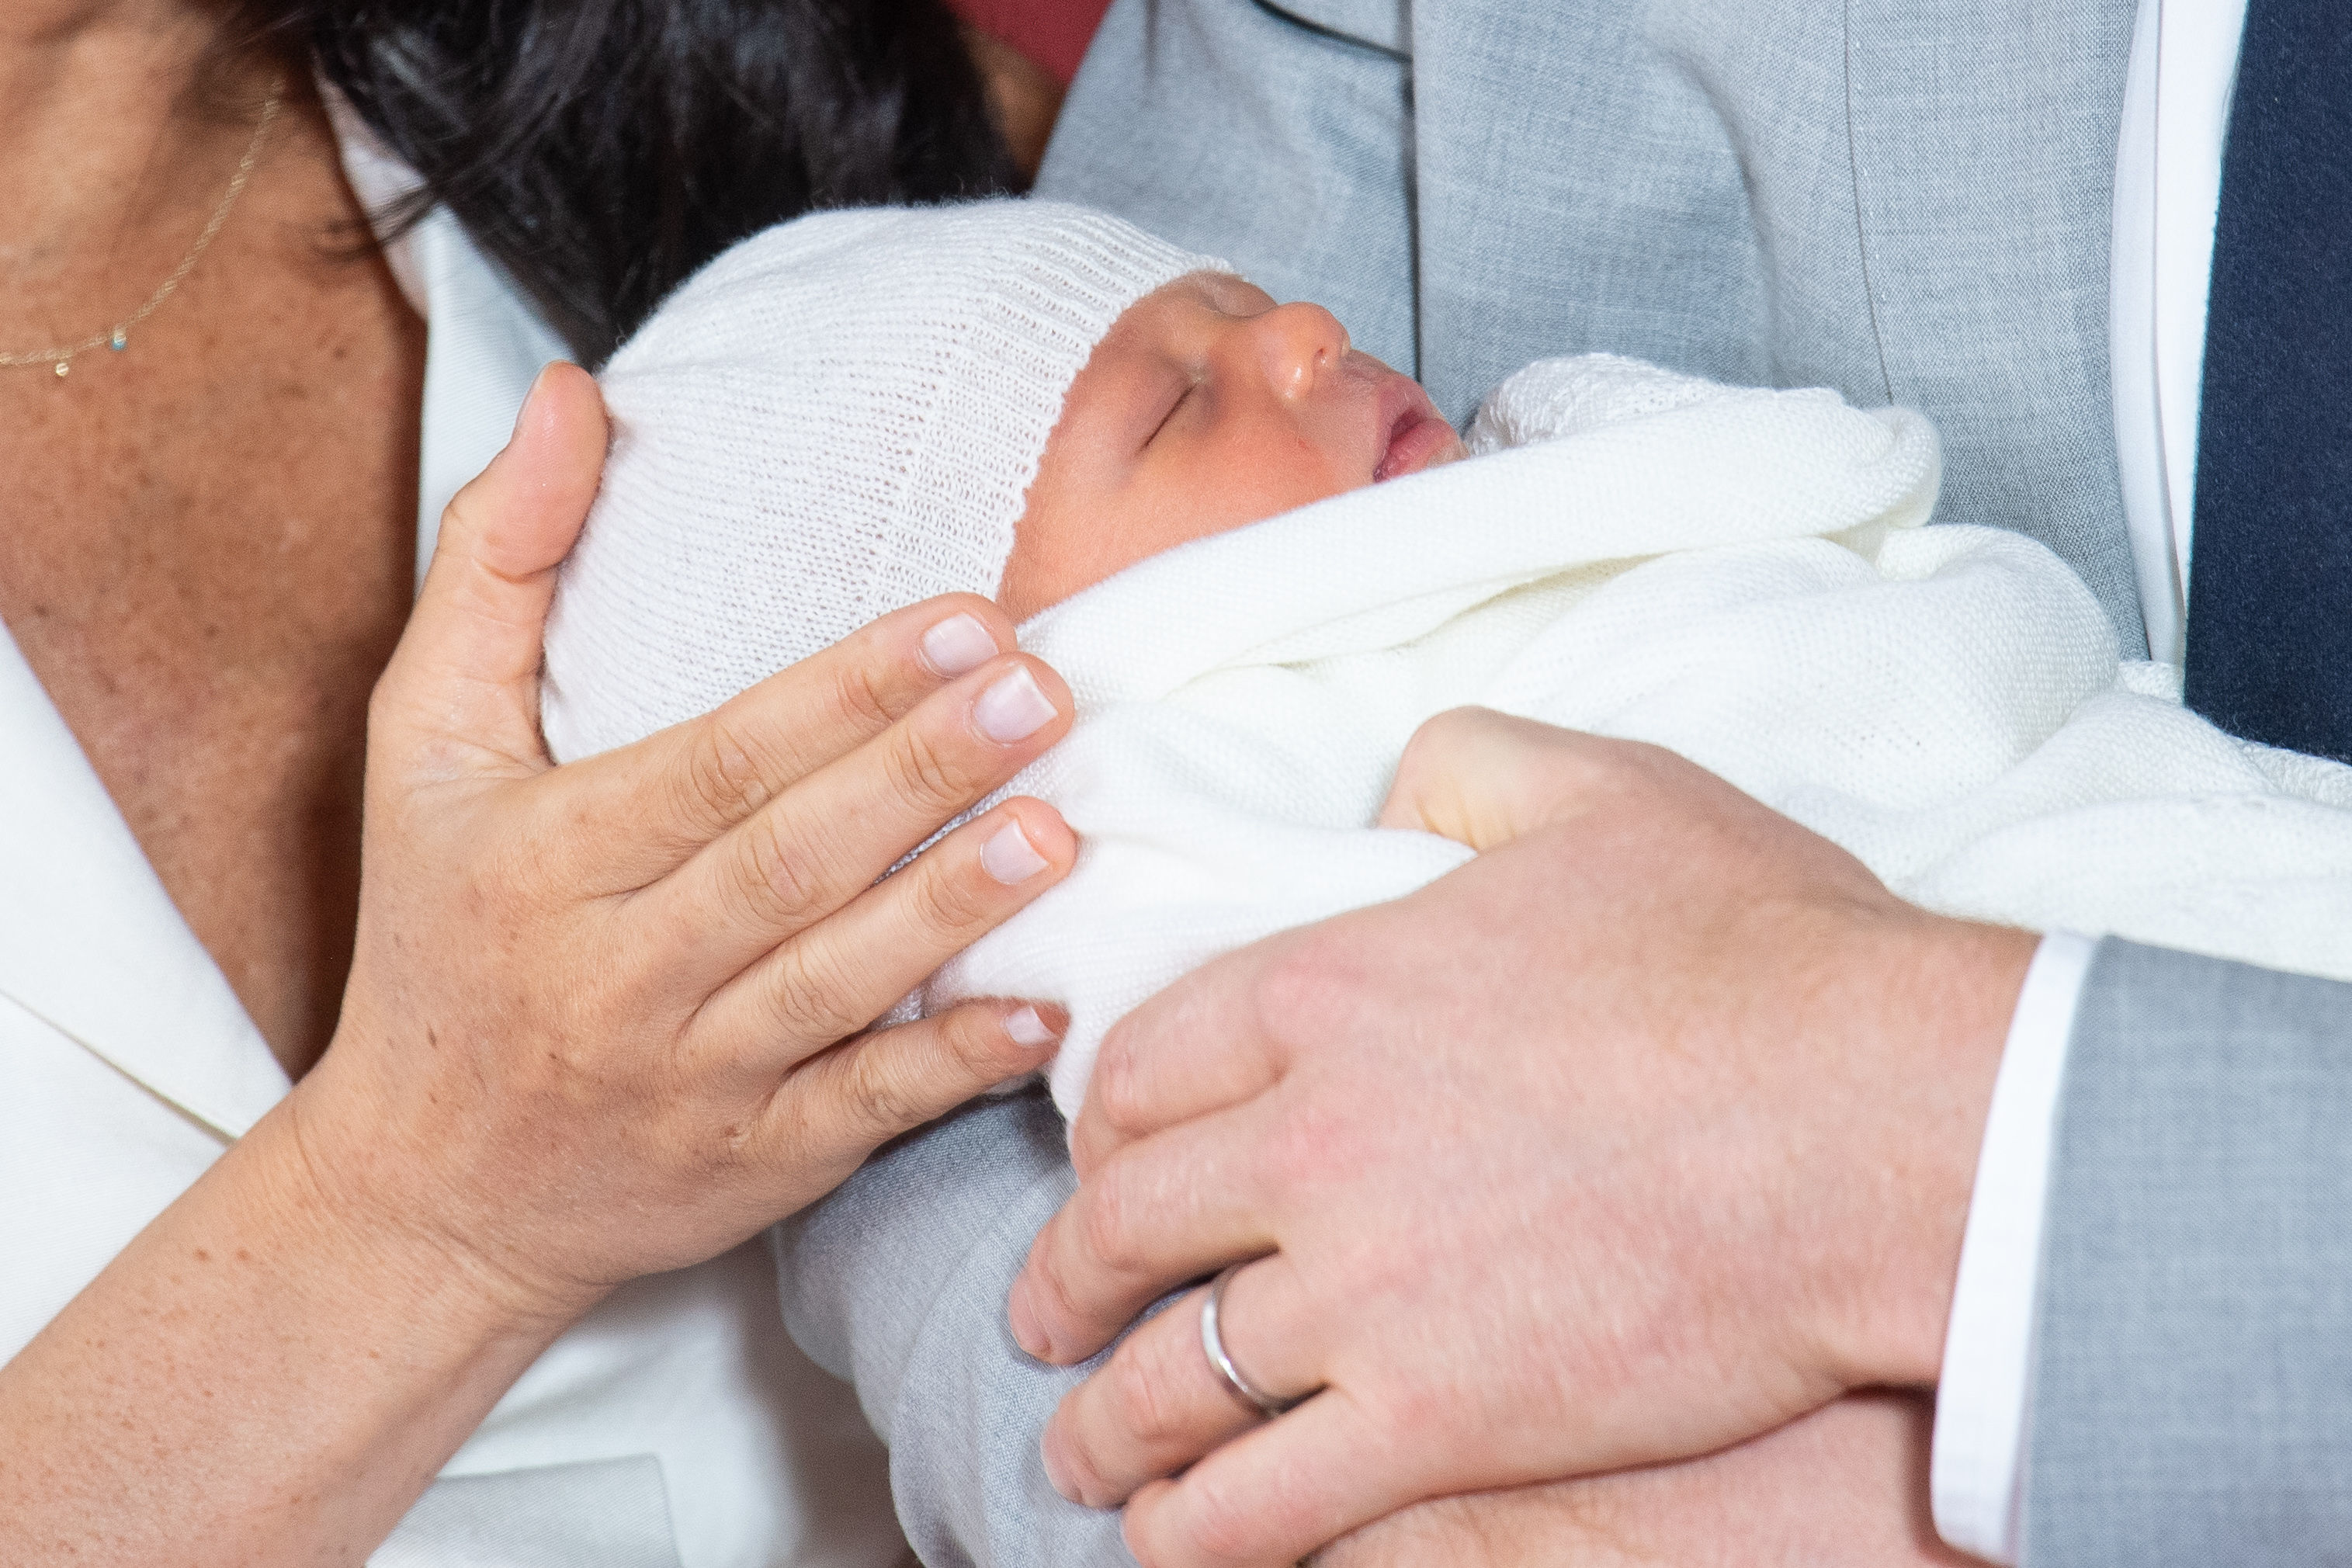 The Duke and Duchess of Sussex with their baby son.